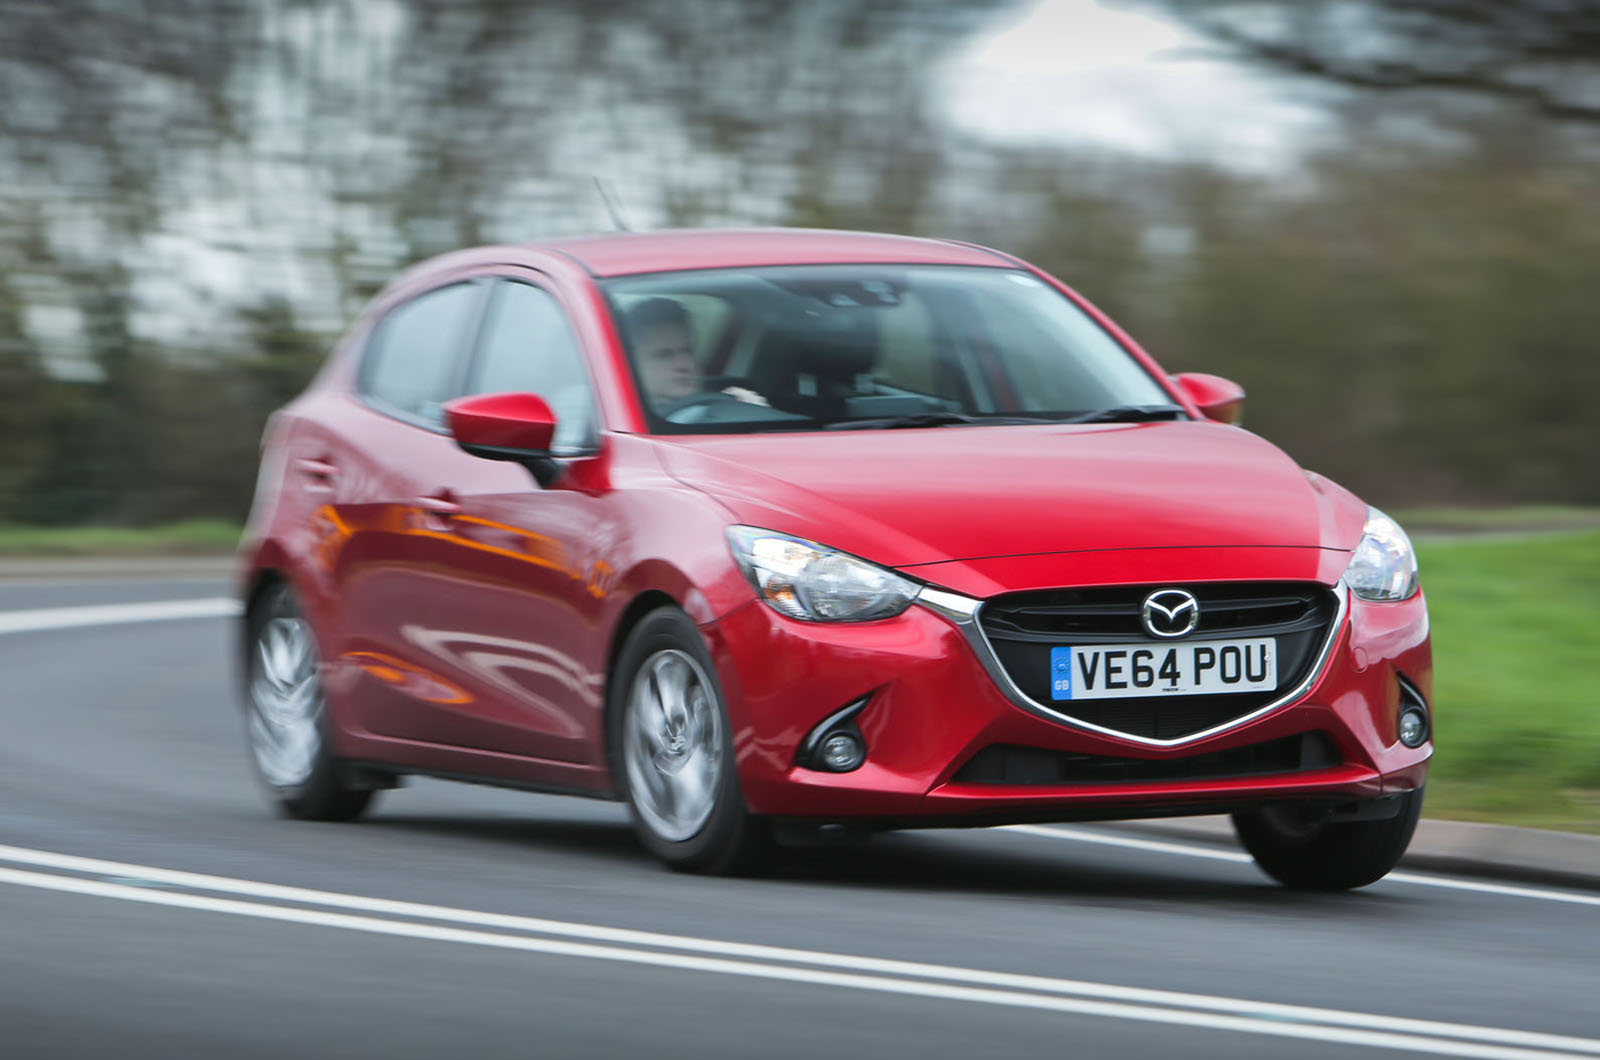 Long-gearing and lack of mid-range torque make climbing inclines in the Mazda 2 difficult